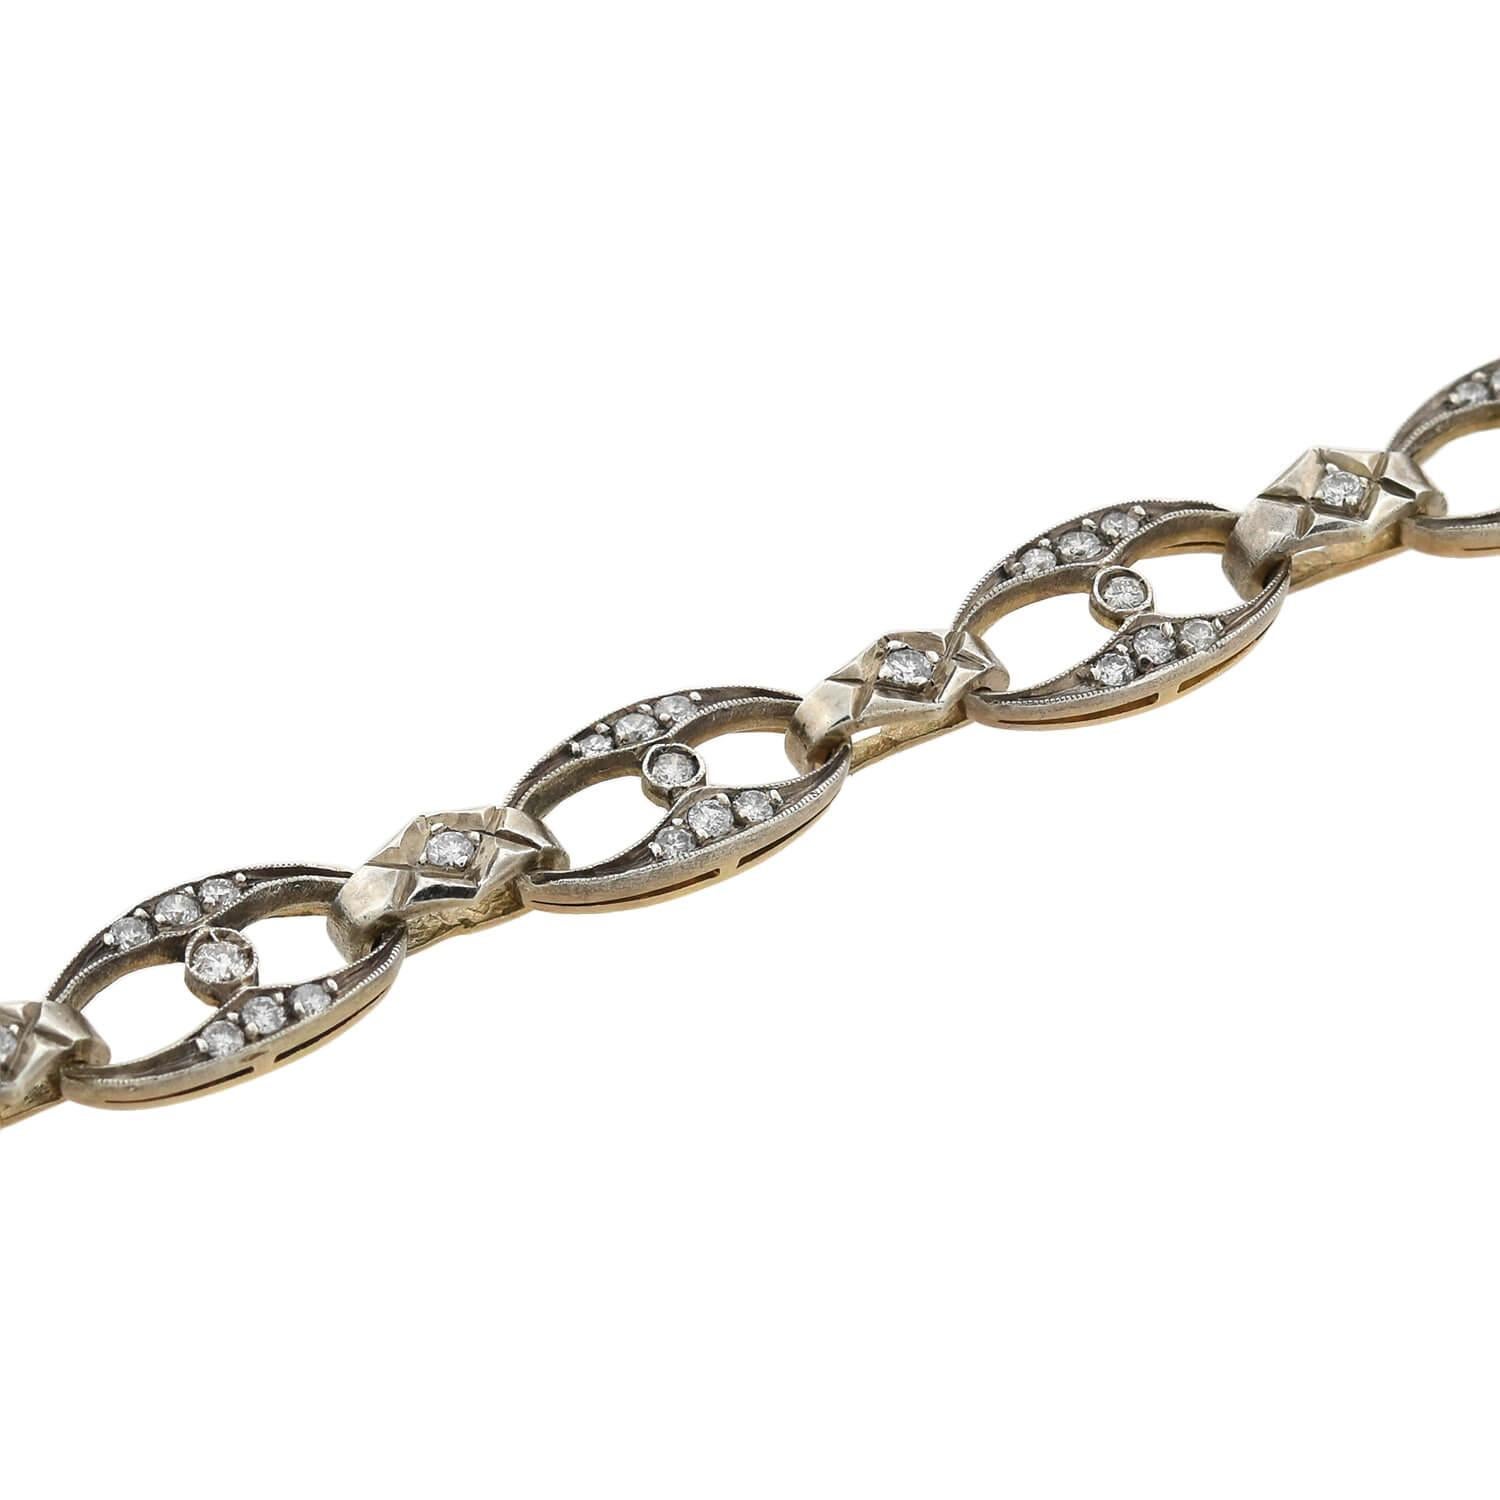 A gorgeous diamond encrusted bracelet from the Art Deco (ca1920) era! This fabulous piece is crafted in sterling topped 14kt yellow gold and features 10 oval-shaped links that alternate with diamond-shaped connector links, coming together to form a